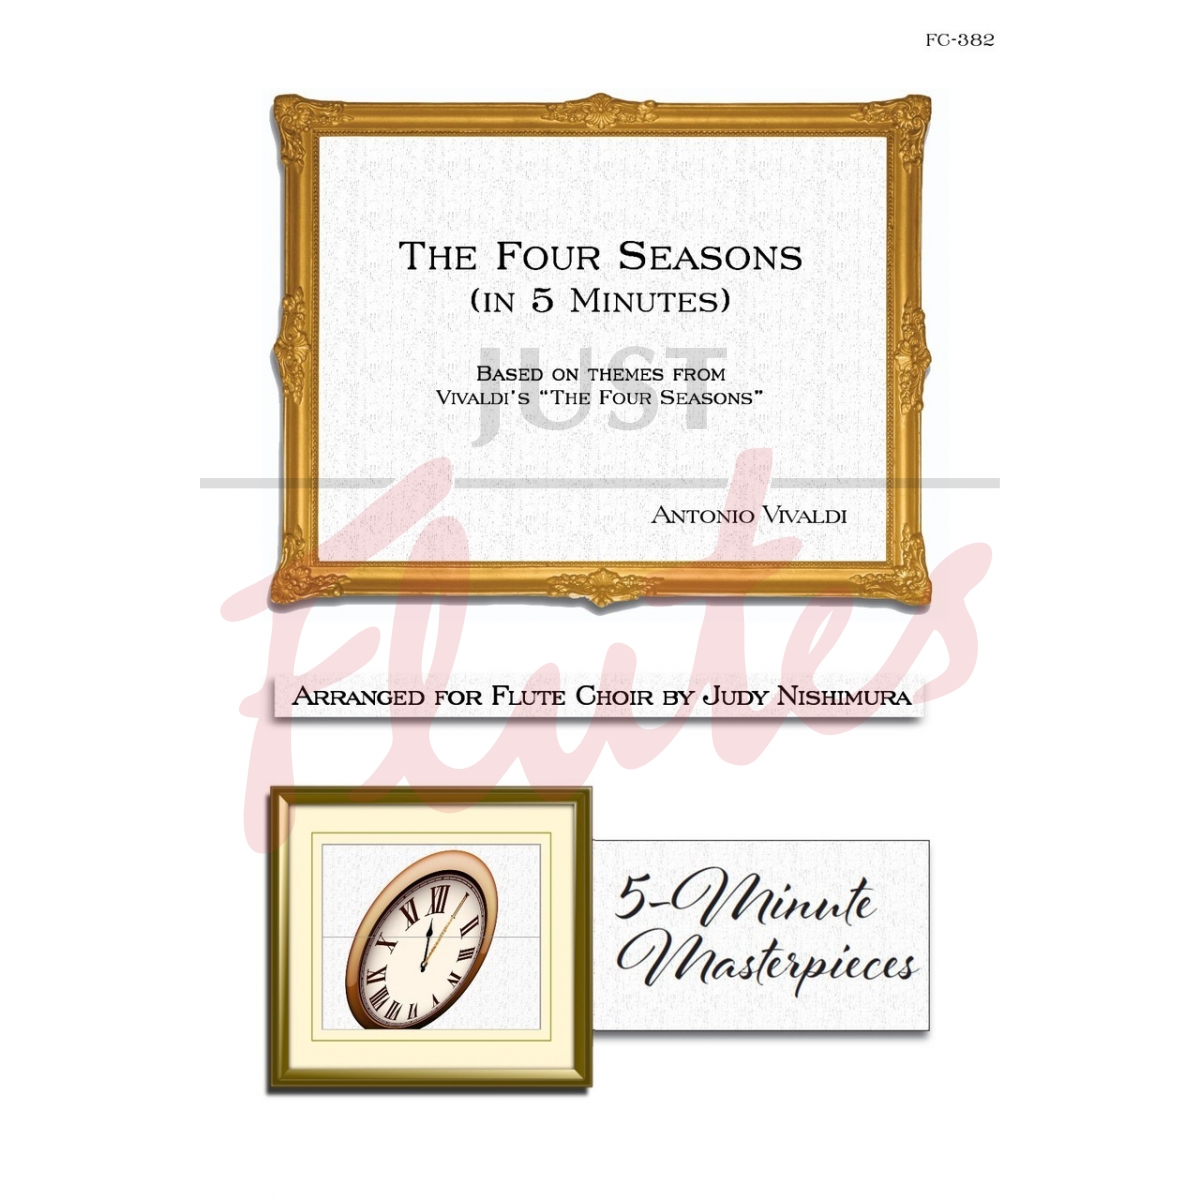 The Four Seasons (in 5 Minutes) for Flute Choir